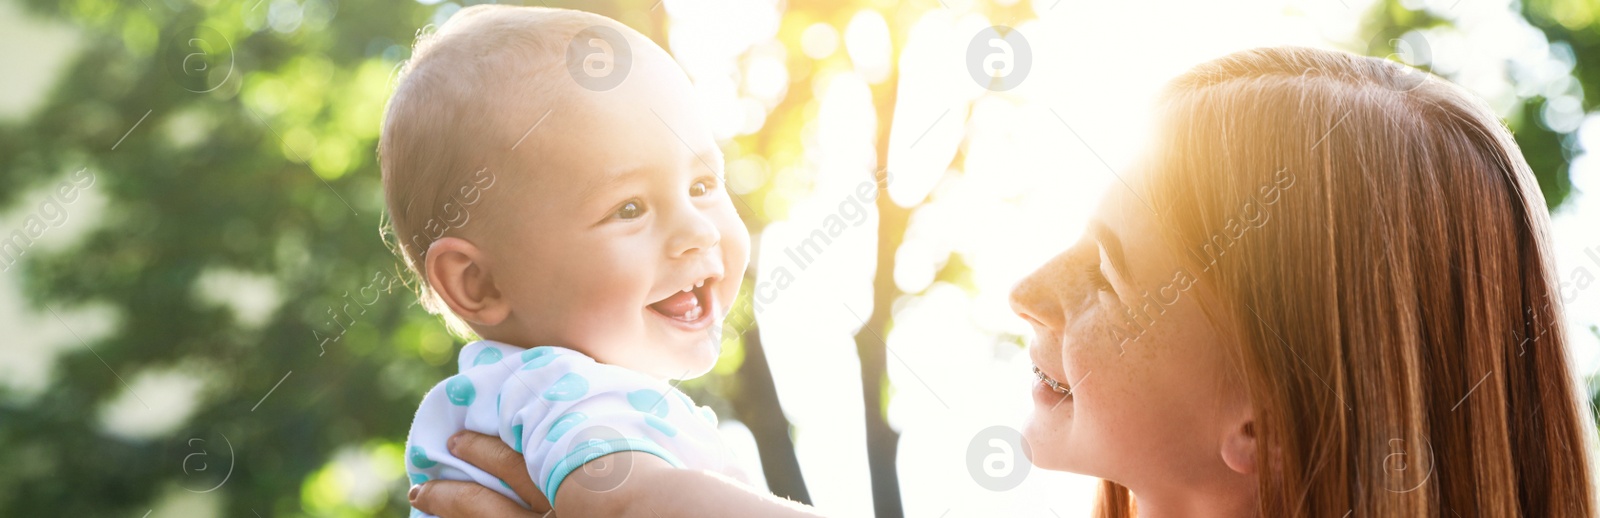 Image of Teen nanny with cute baby outdoors on sunny day. Banner design 